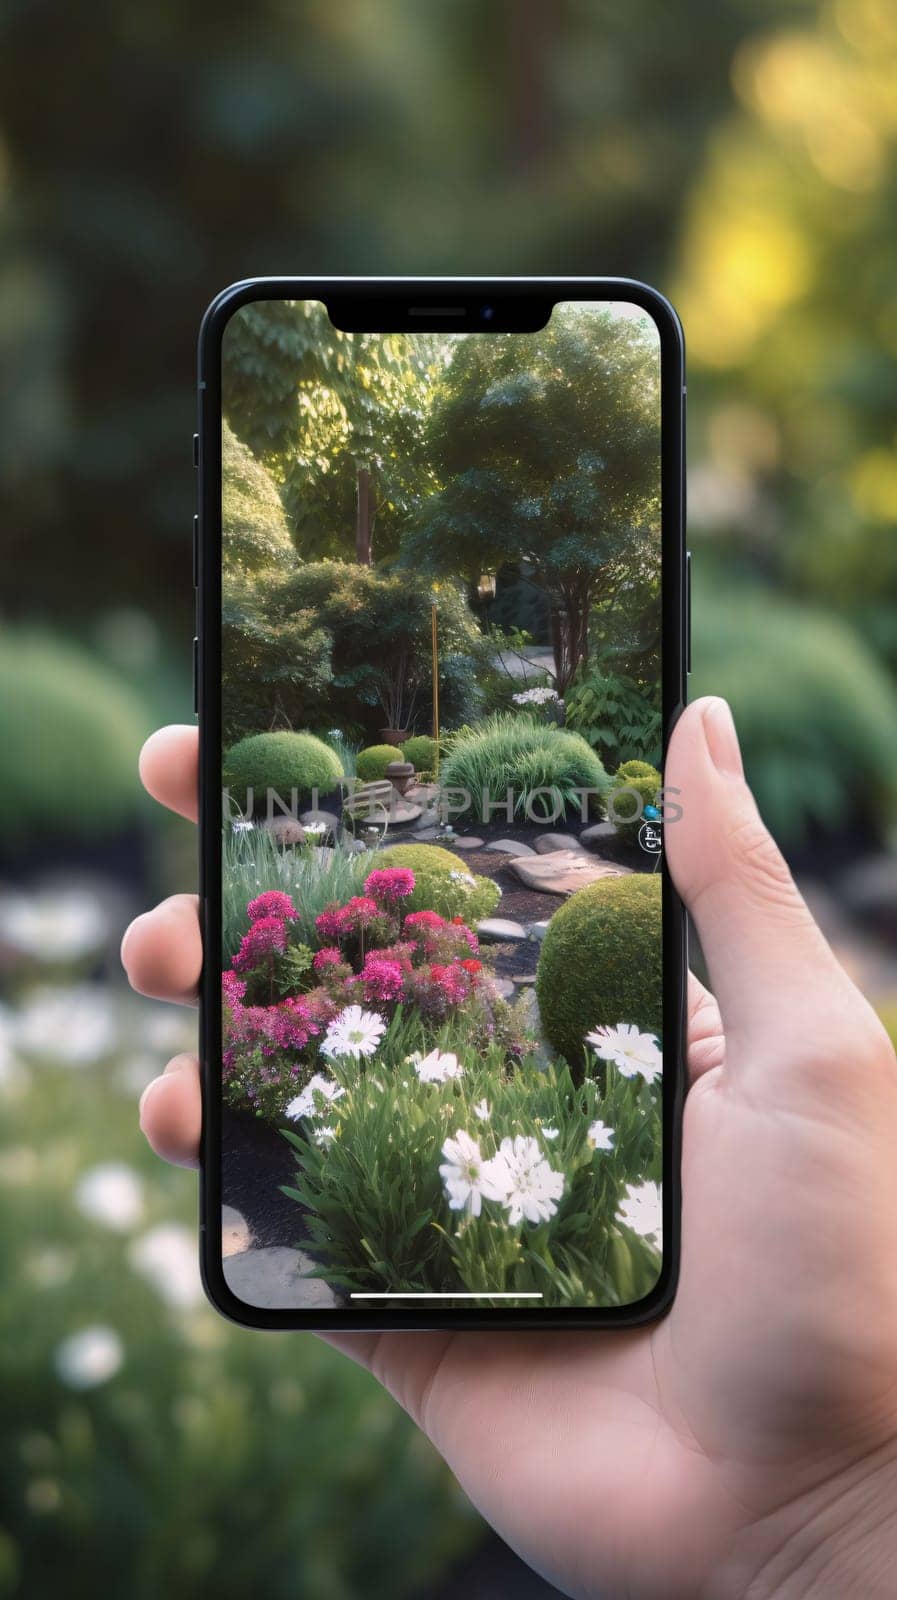 Smartphone screen: Taking photo on smart phone concept: hand holding smartphone with flower garden background